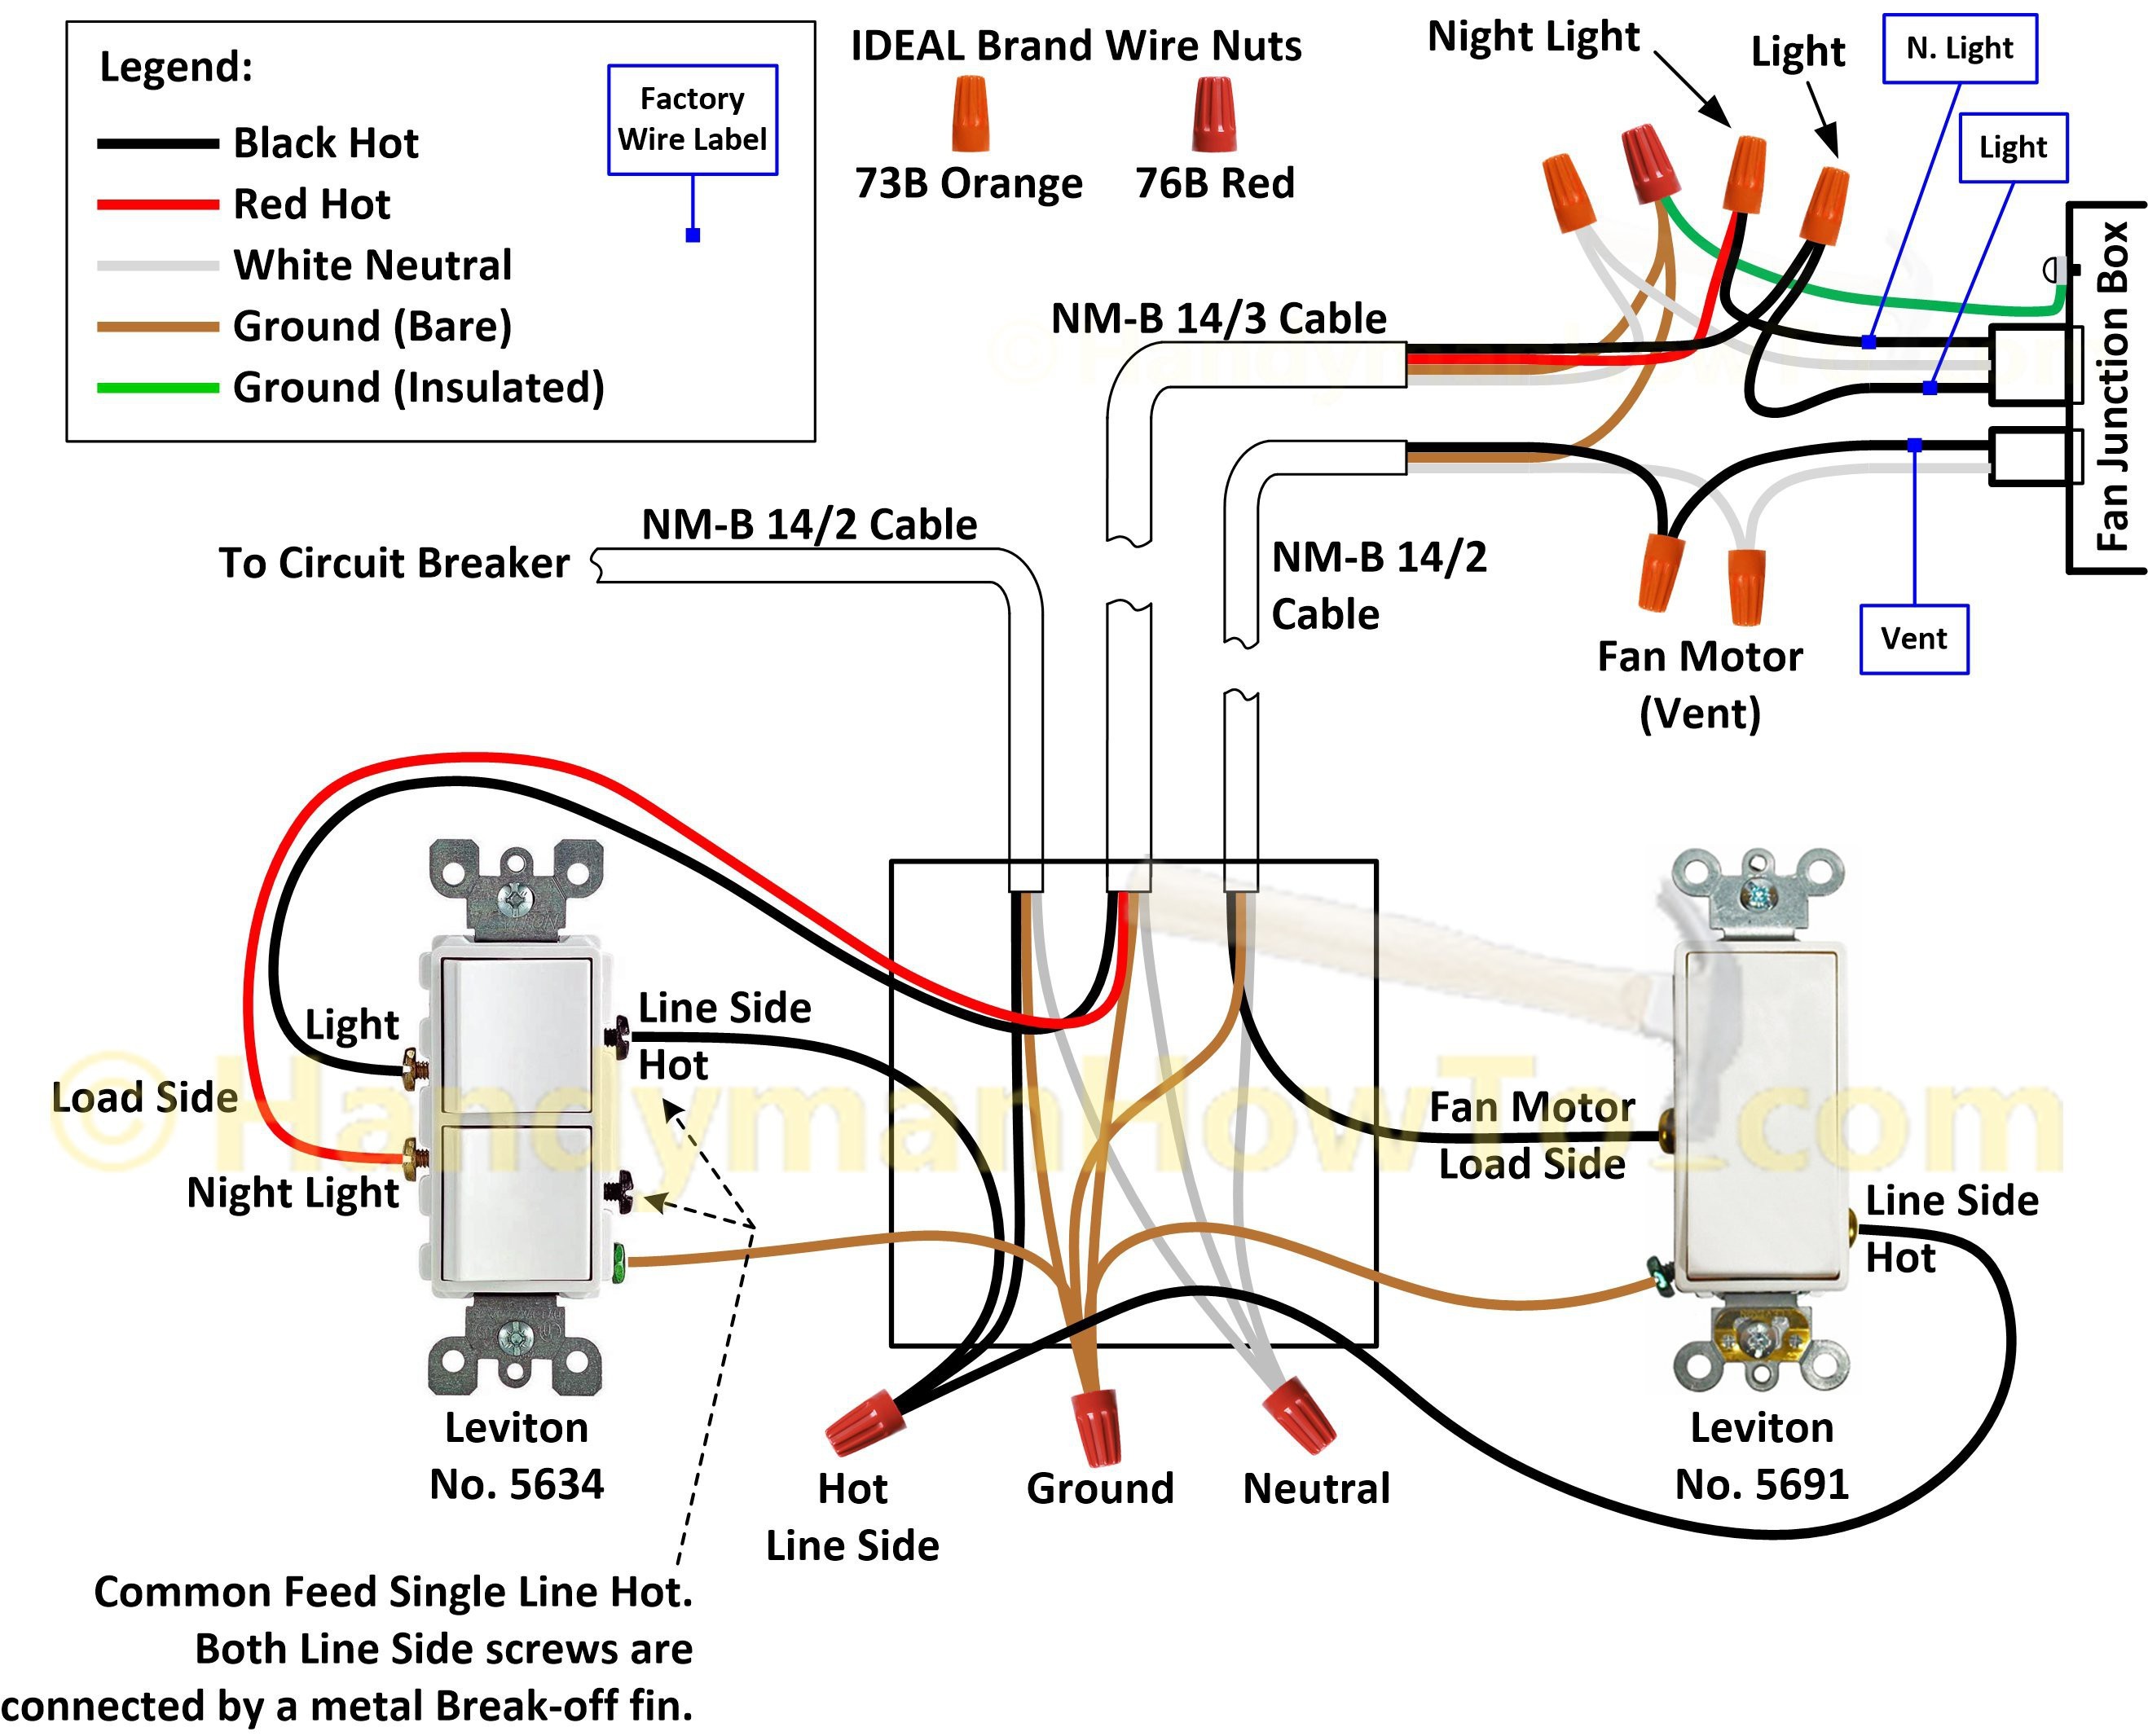 Awesome Gfci Wiring Diagram